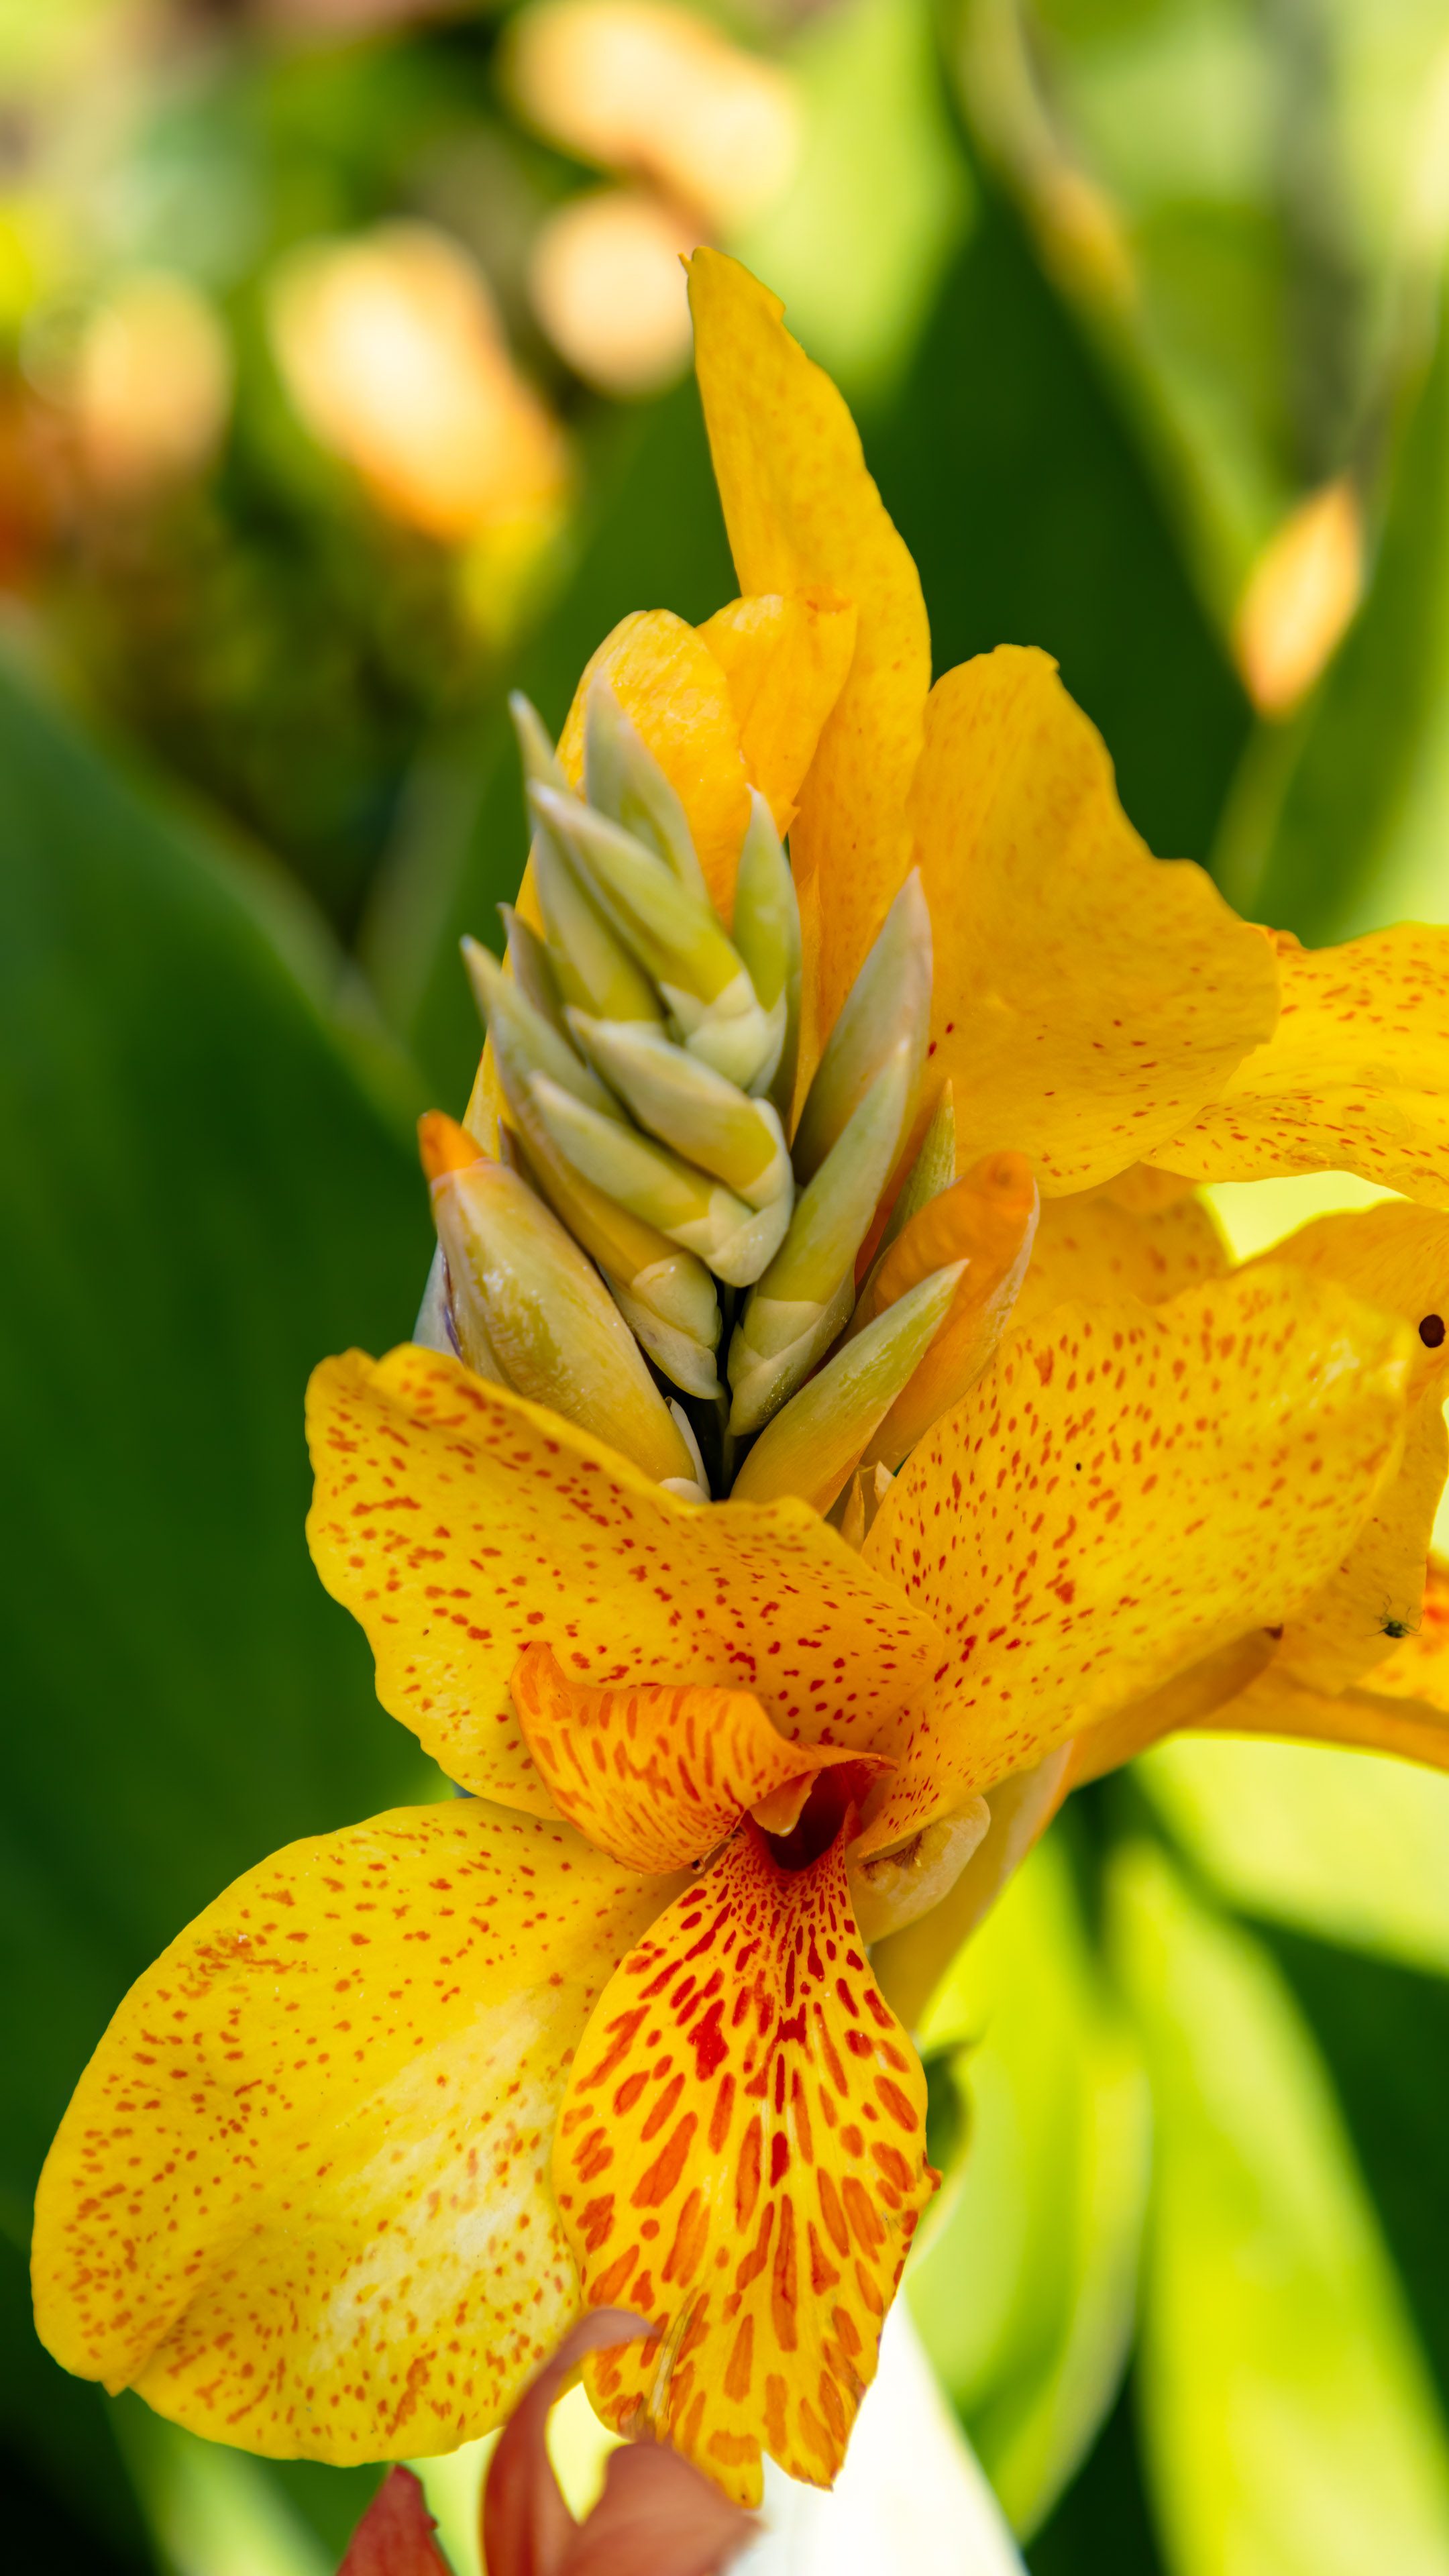 Enhance your device with the vibrant hues of full HD yellow flower nature wallpaper.